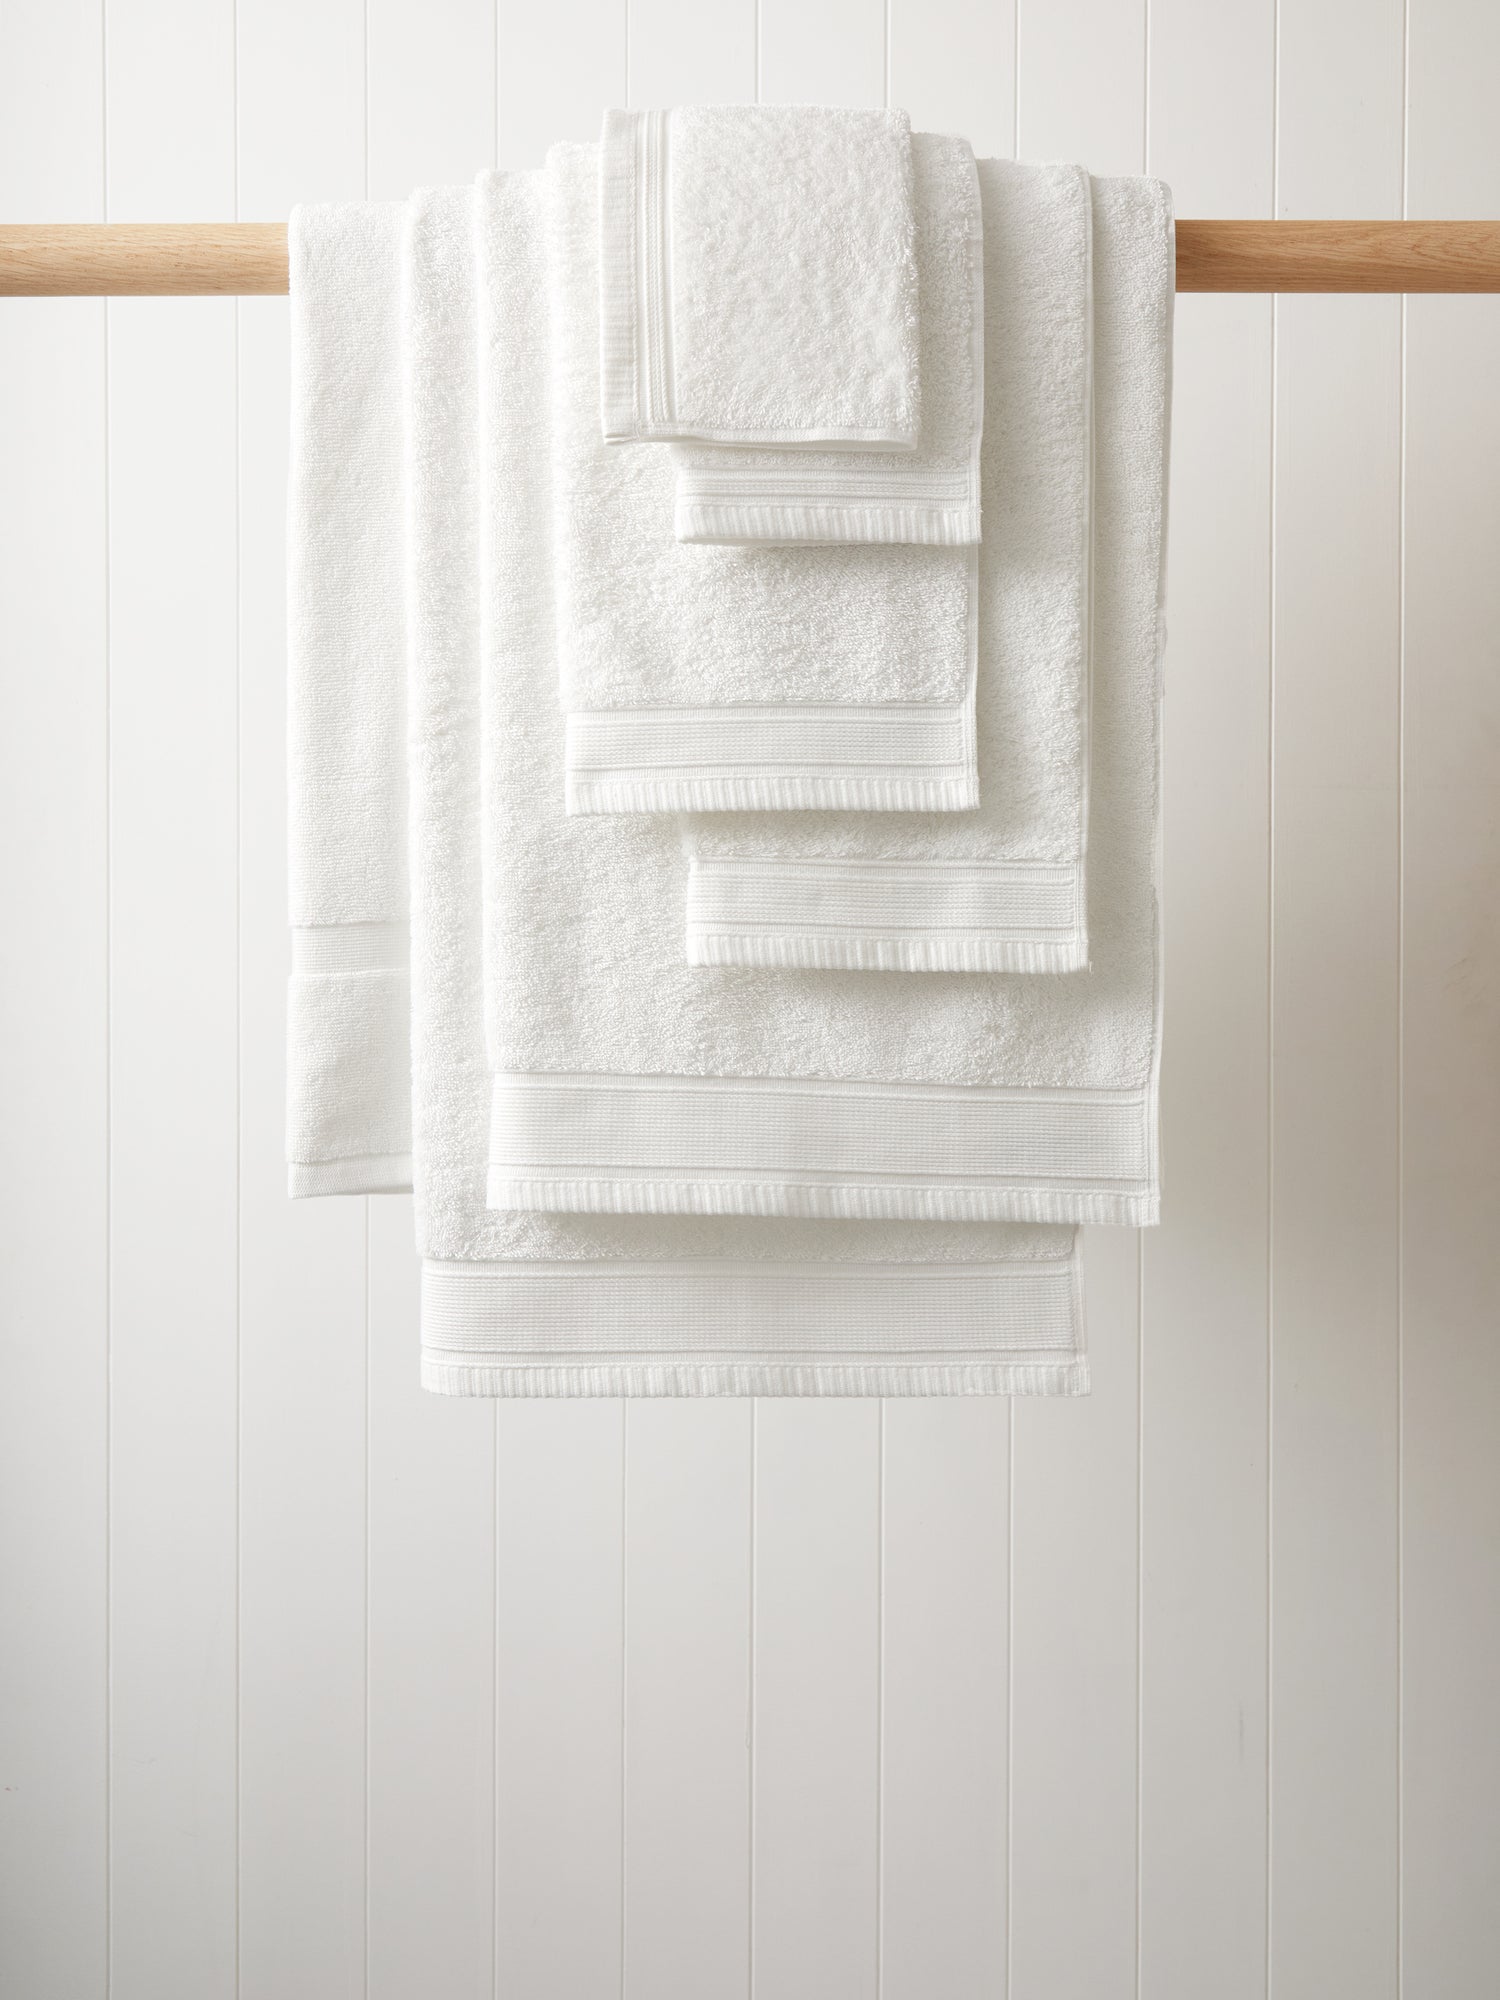 https://www.wallacecotton.com/content/products/oasis-towel-set-white-1-5765.jpg?width=1500